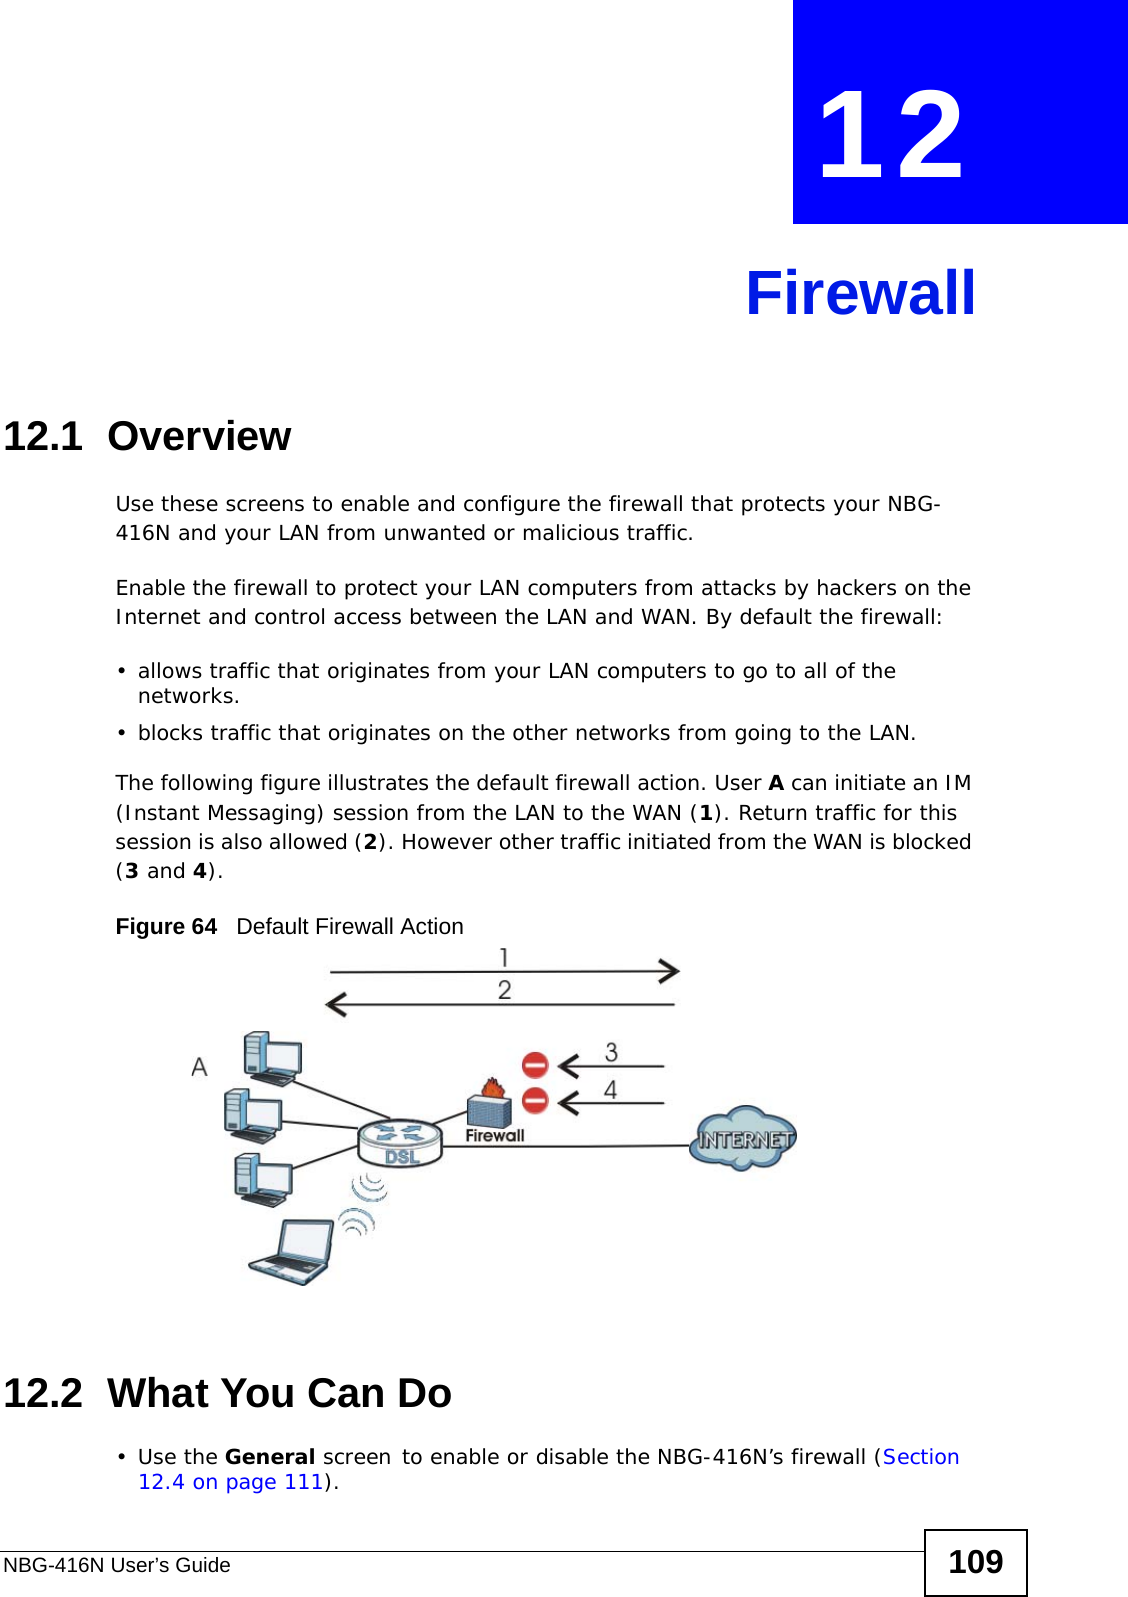 NBG-416N User’s Guide 109CHAPTER  12  Firewall12.1  Overview   Use these screens to enable and configure the firewall that protects your NBG-416N and your LAN from unwanted or malicious traffic.Enable the firewall to protect your LAN computers from attacks by hackers on the Internet and control access between the LAN and WAN. By default the firewall:• allows traffic that originates from your LAN computers to go to all of the networks. • blocks traffic that originates on the other networks from going to the LAN. The following figure illustrates the default firewall action. User A can initiate an IM (Instant Messaging) session from the LAN to the WAN (1). Return traffic for this session is also allowed (2). However other traffic initiated from the WAN is blocked (3 and 4).Figure 64   Default Firewall Action12.2  What You Can Do•Use the General screen to enable or disable the NBG-416N’s firewall (Section 12.4 on page 111).